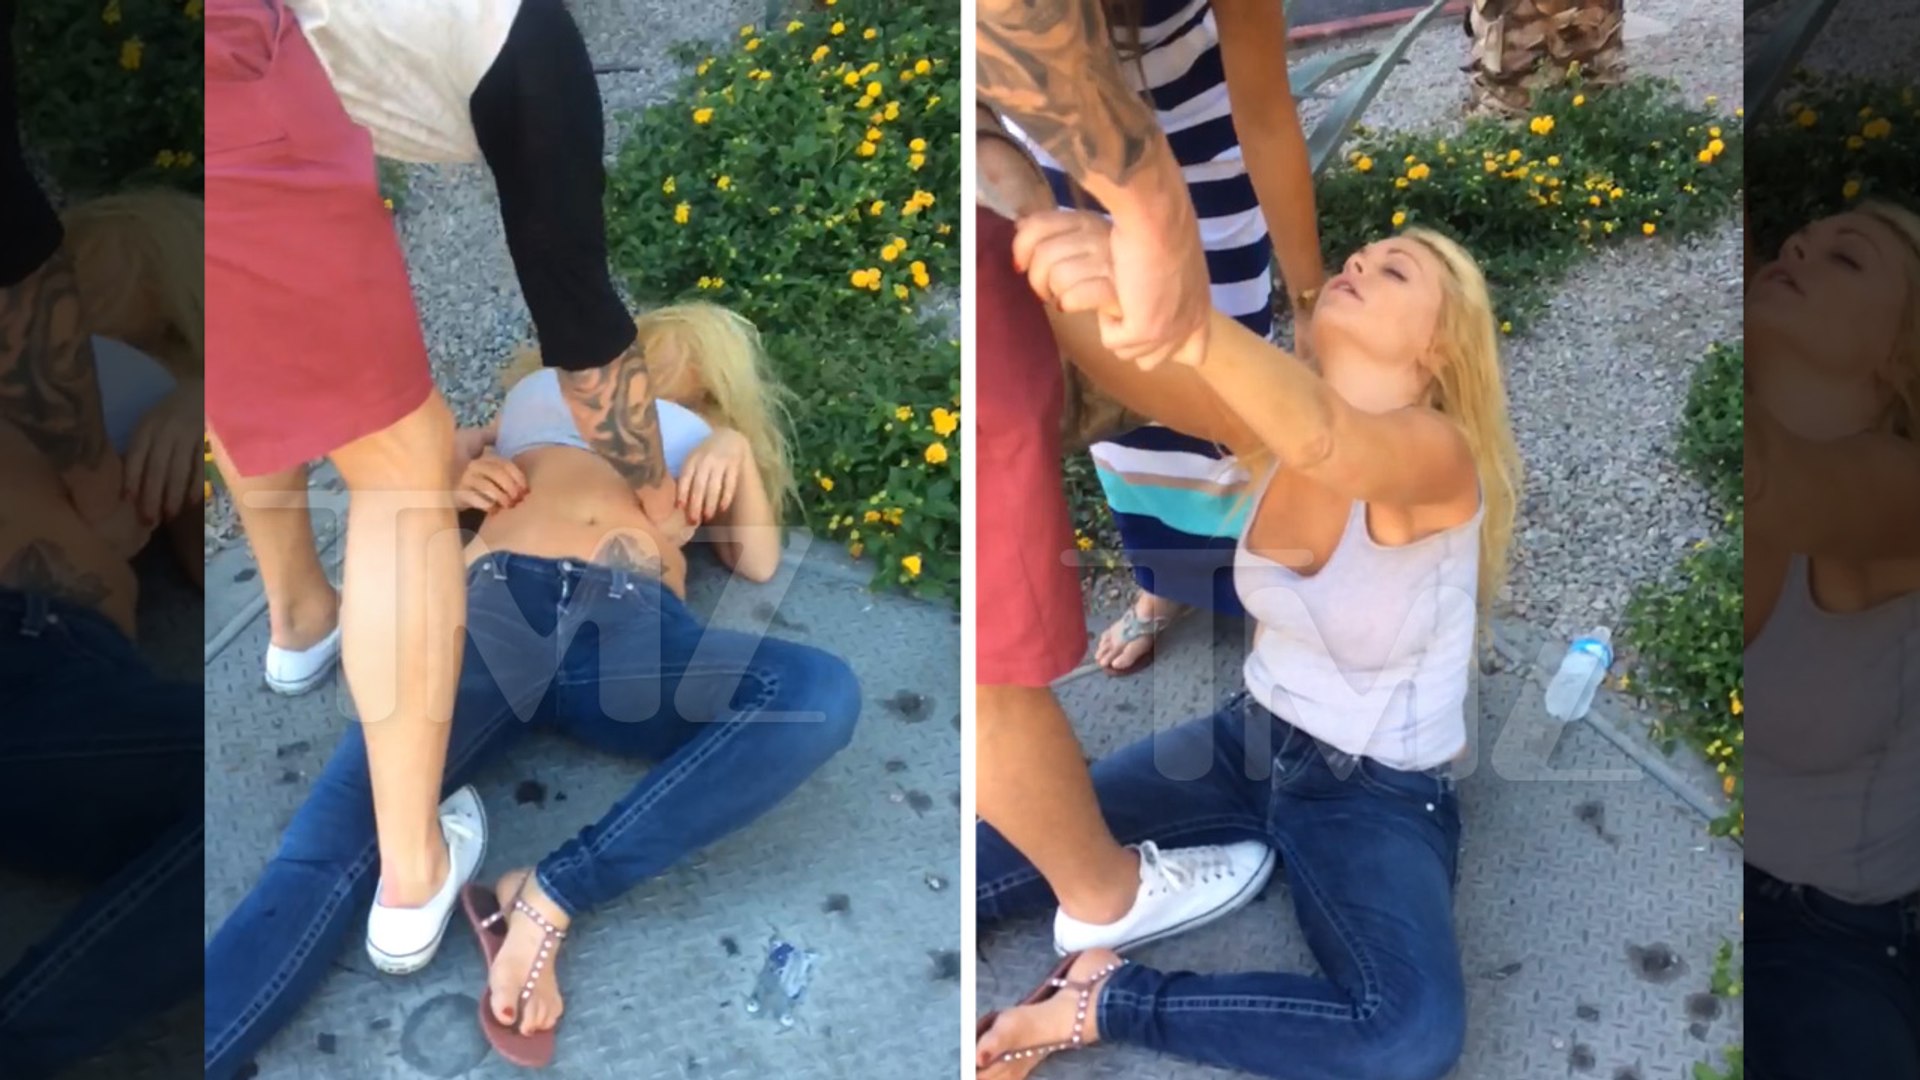 Porn Star Jesse Jane Passed OUT COLD On the Vegas Strip! - video Dailymotion